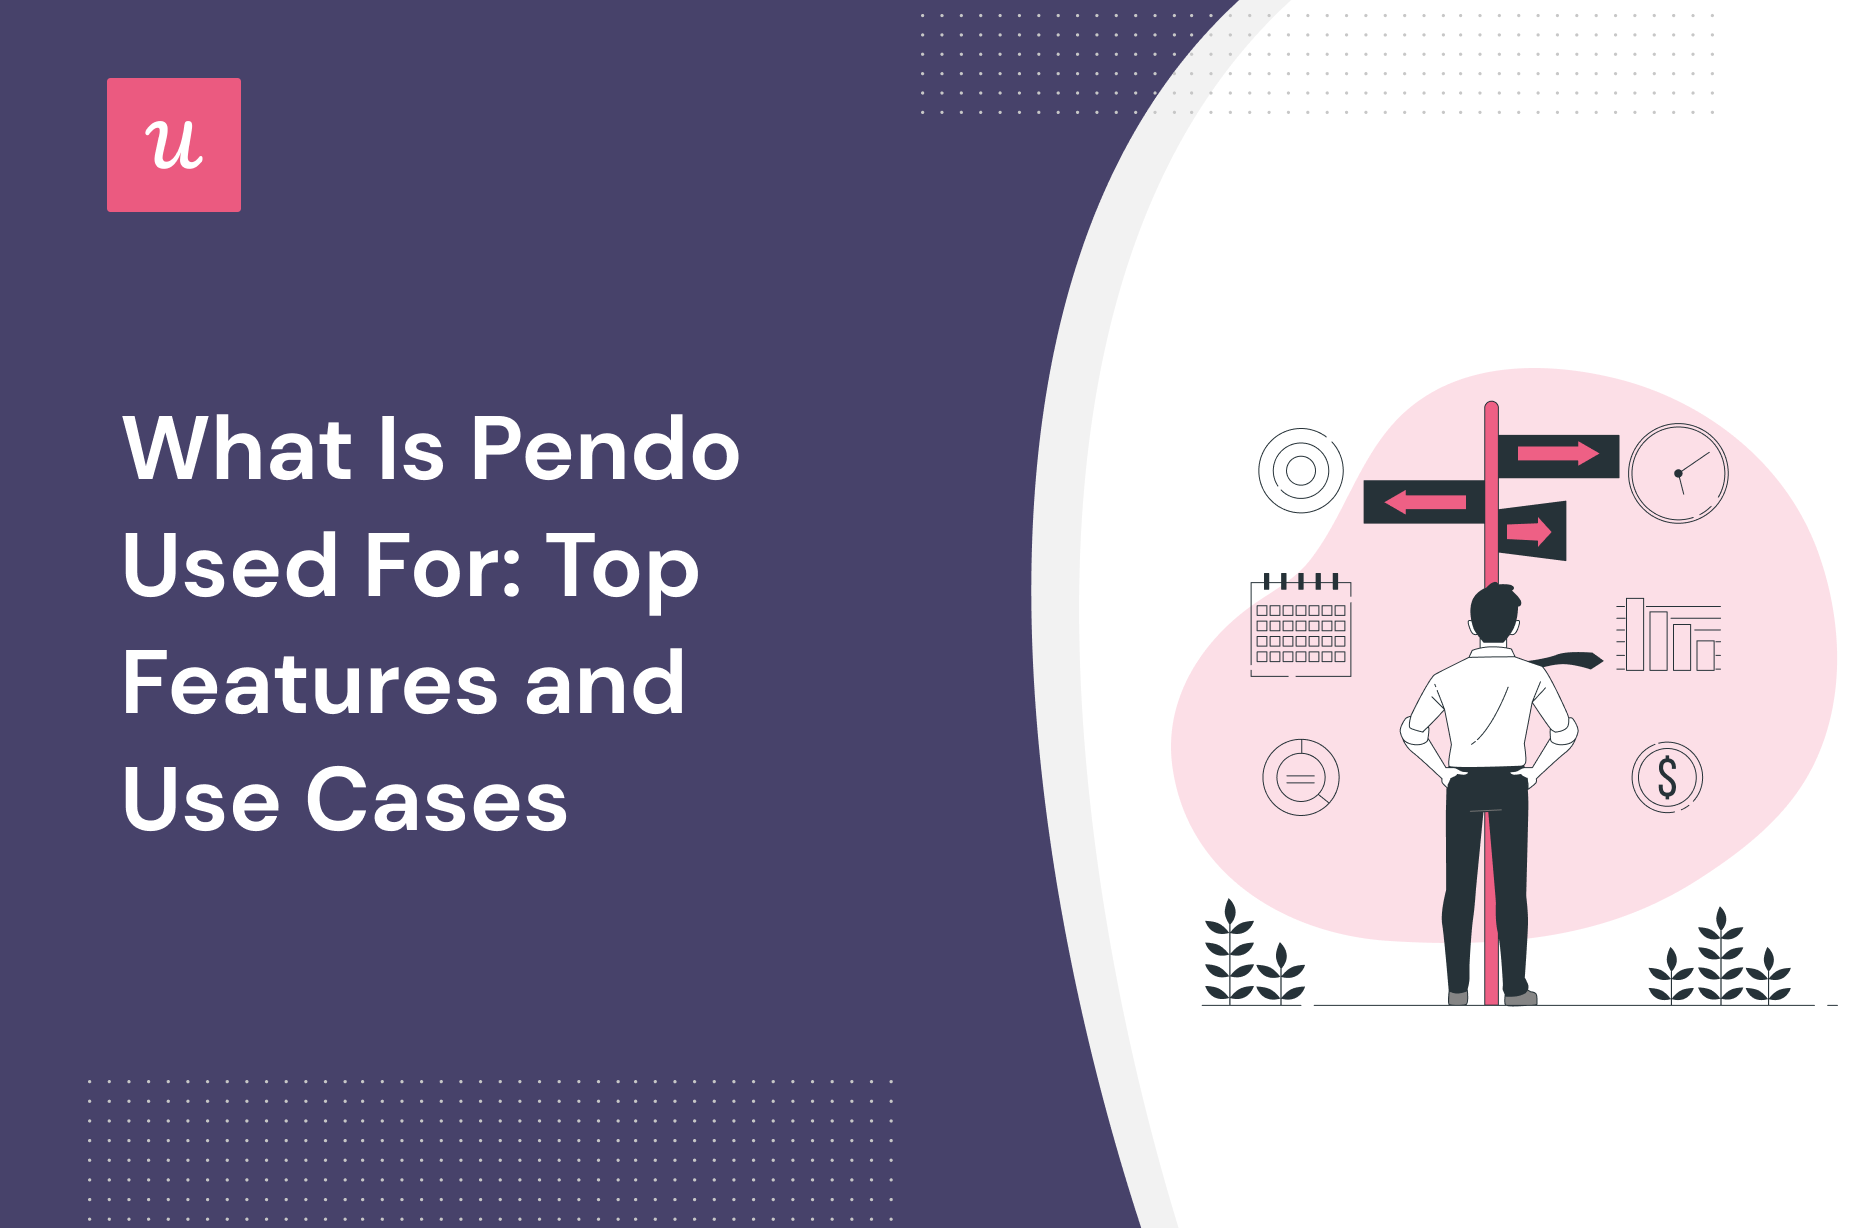 What Is Pendo Used For: Top Features and Use Cases